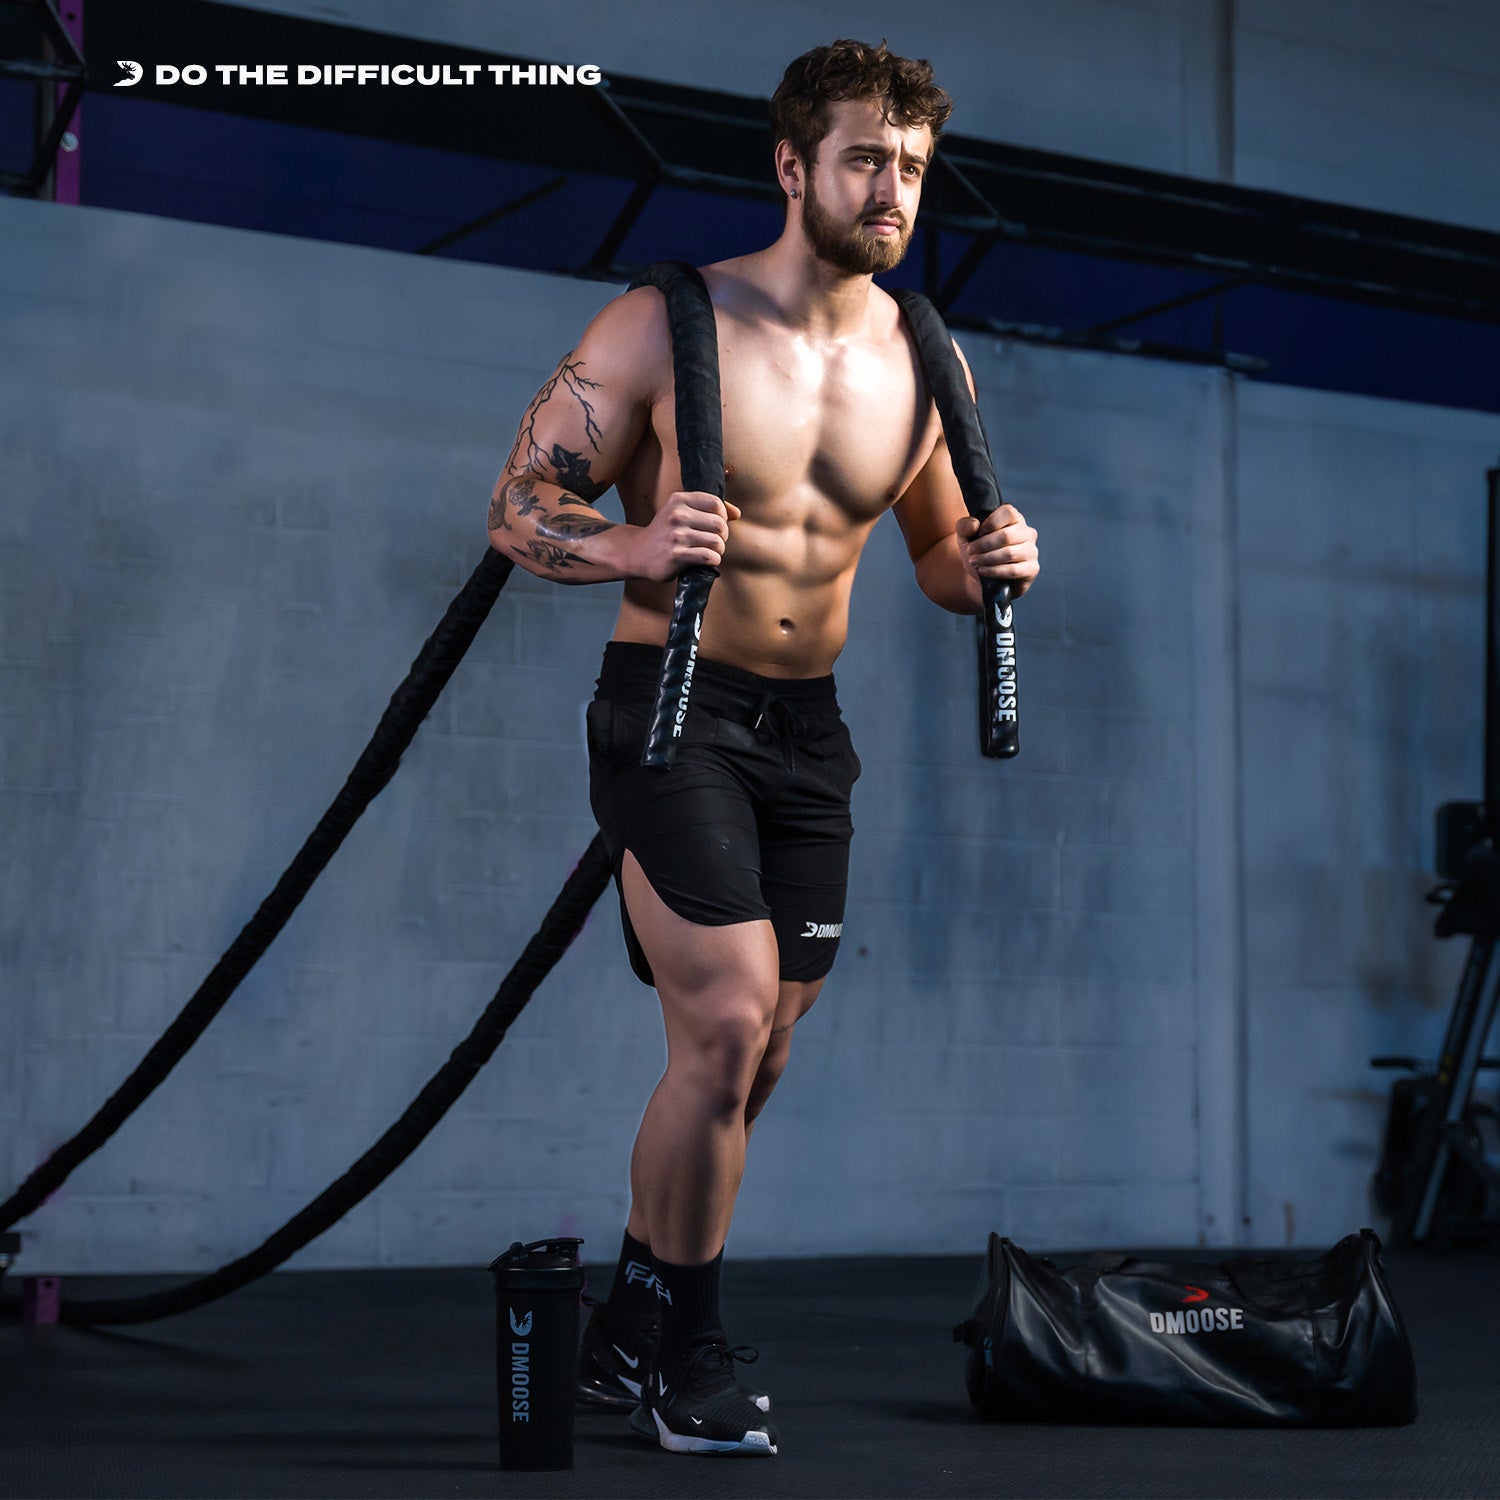 How to Use Battle Ropes Properly: A Complete Beginner's Guide – DMoose